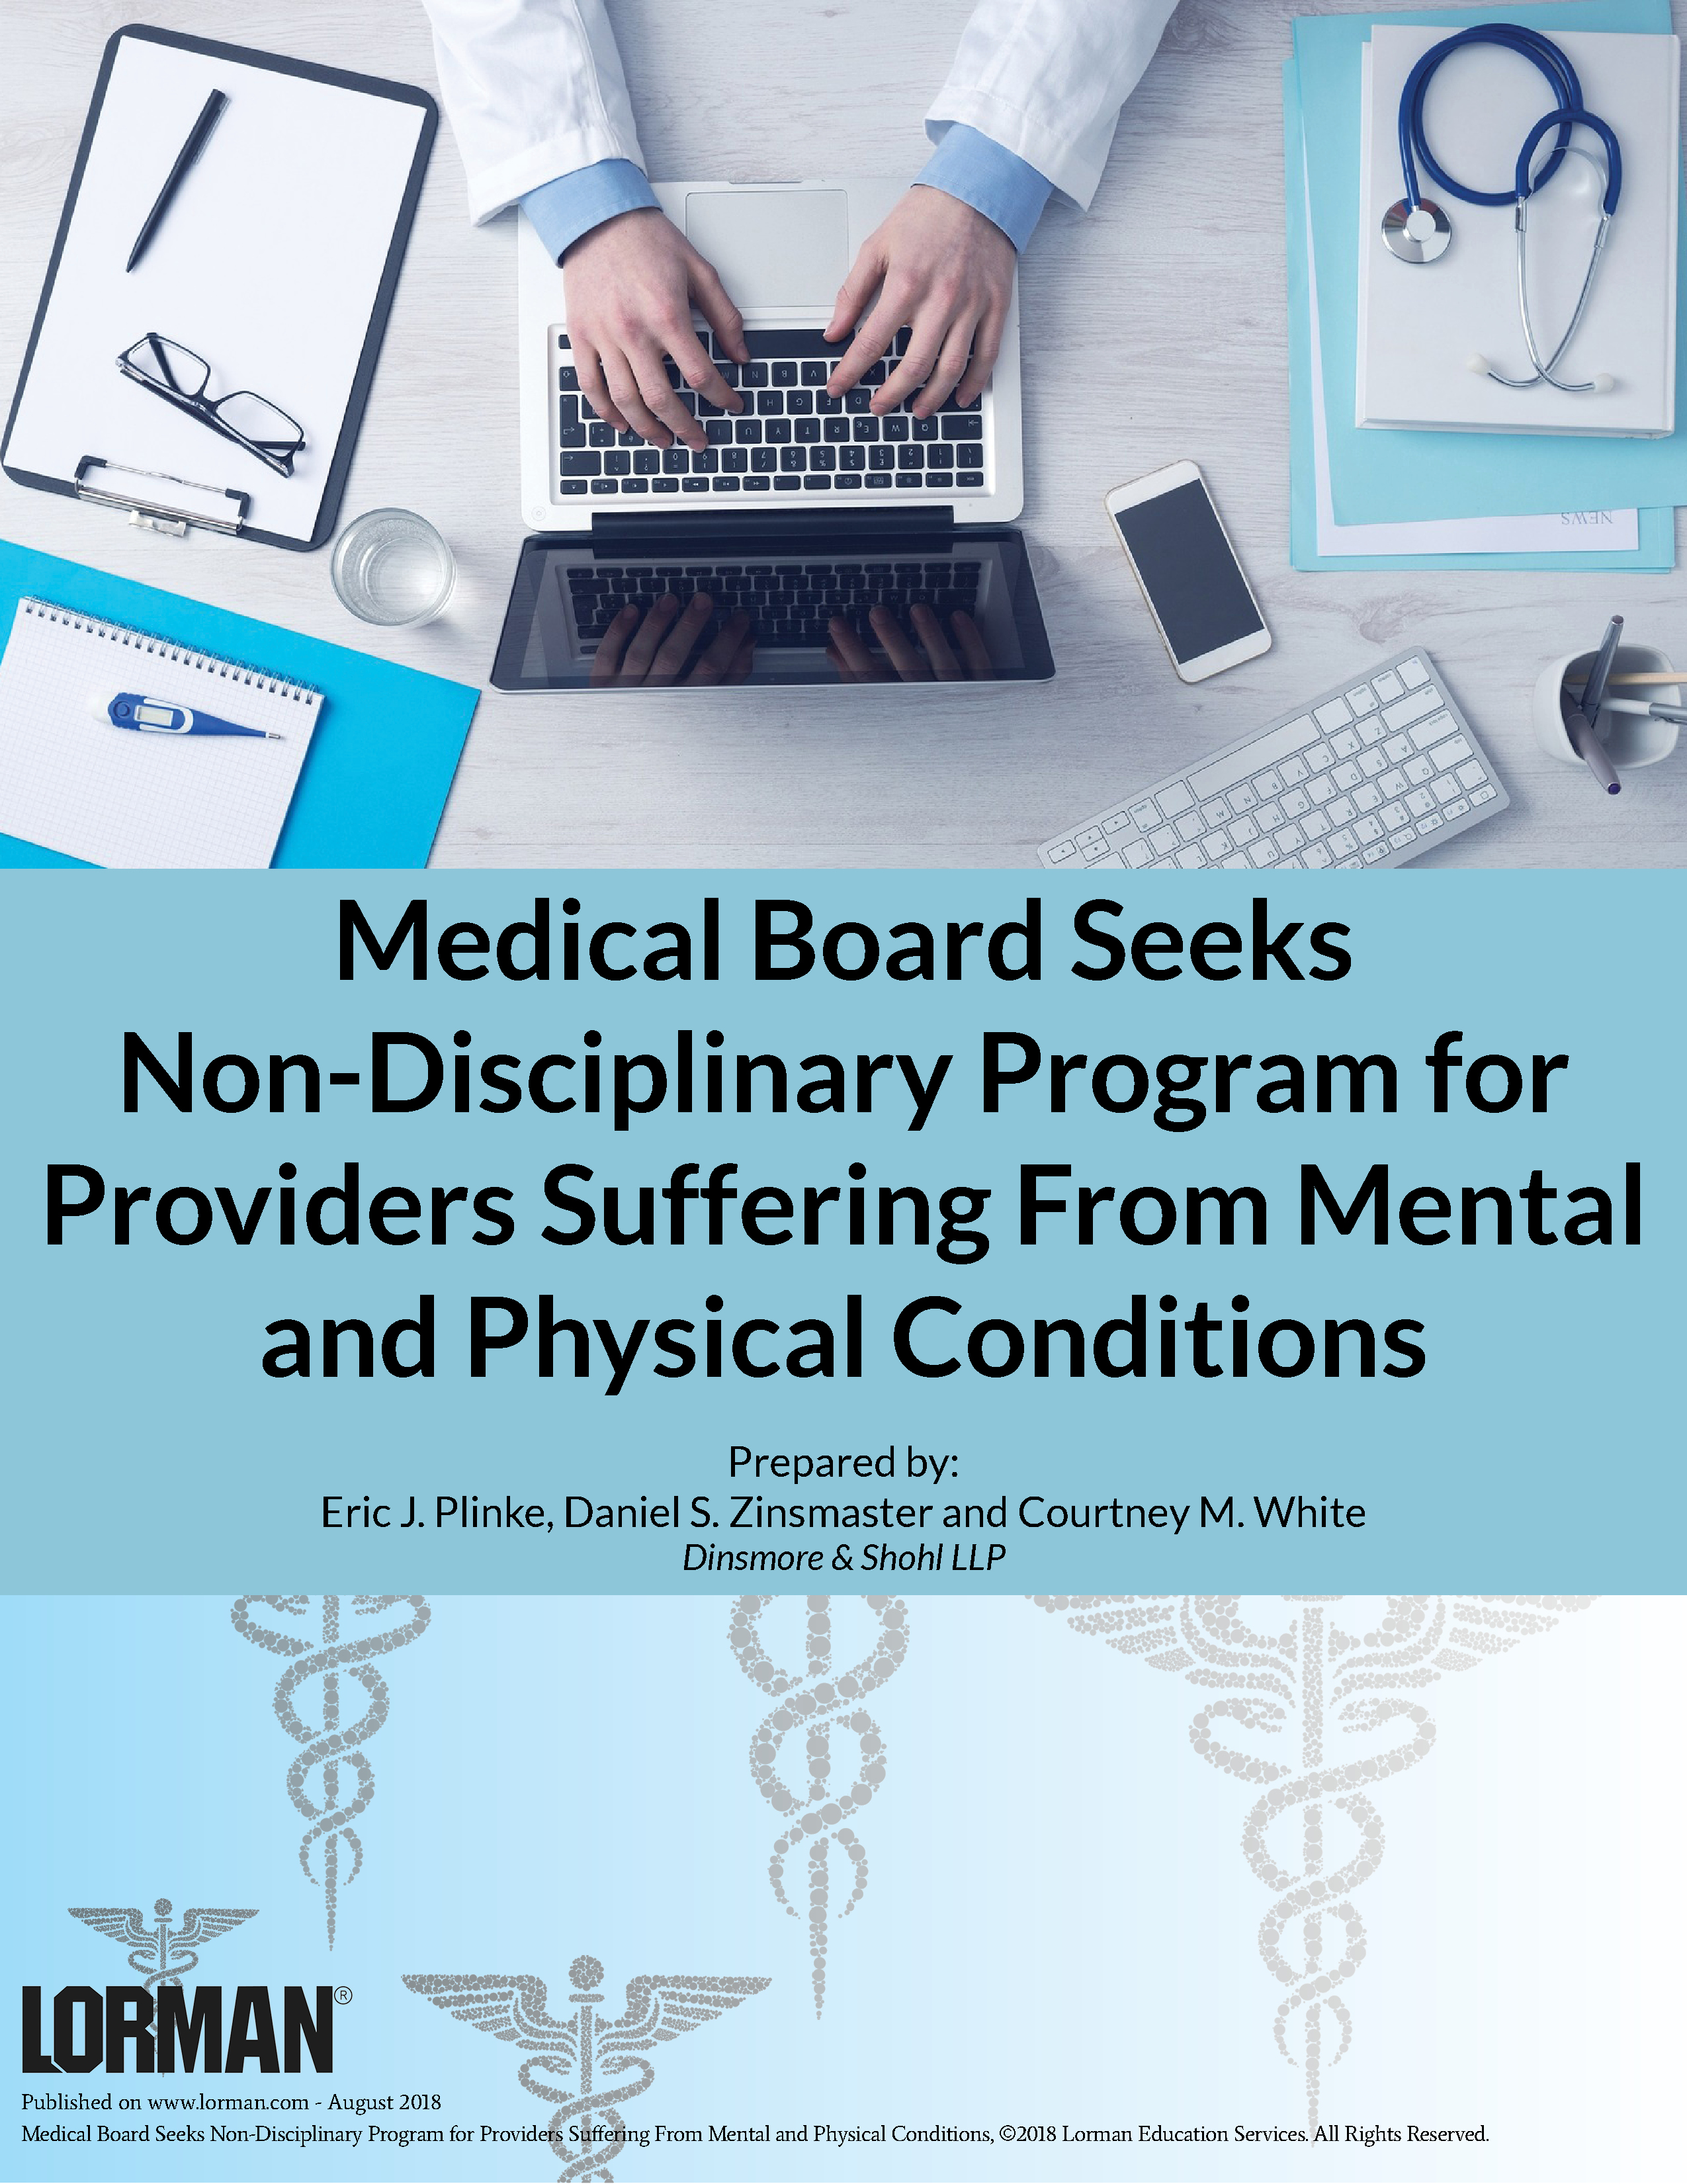 Medical Board Seeks Non-Disciplinary Program for Providers Suffering From Mental/Physical Conditions